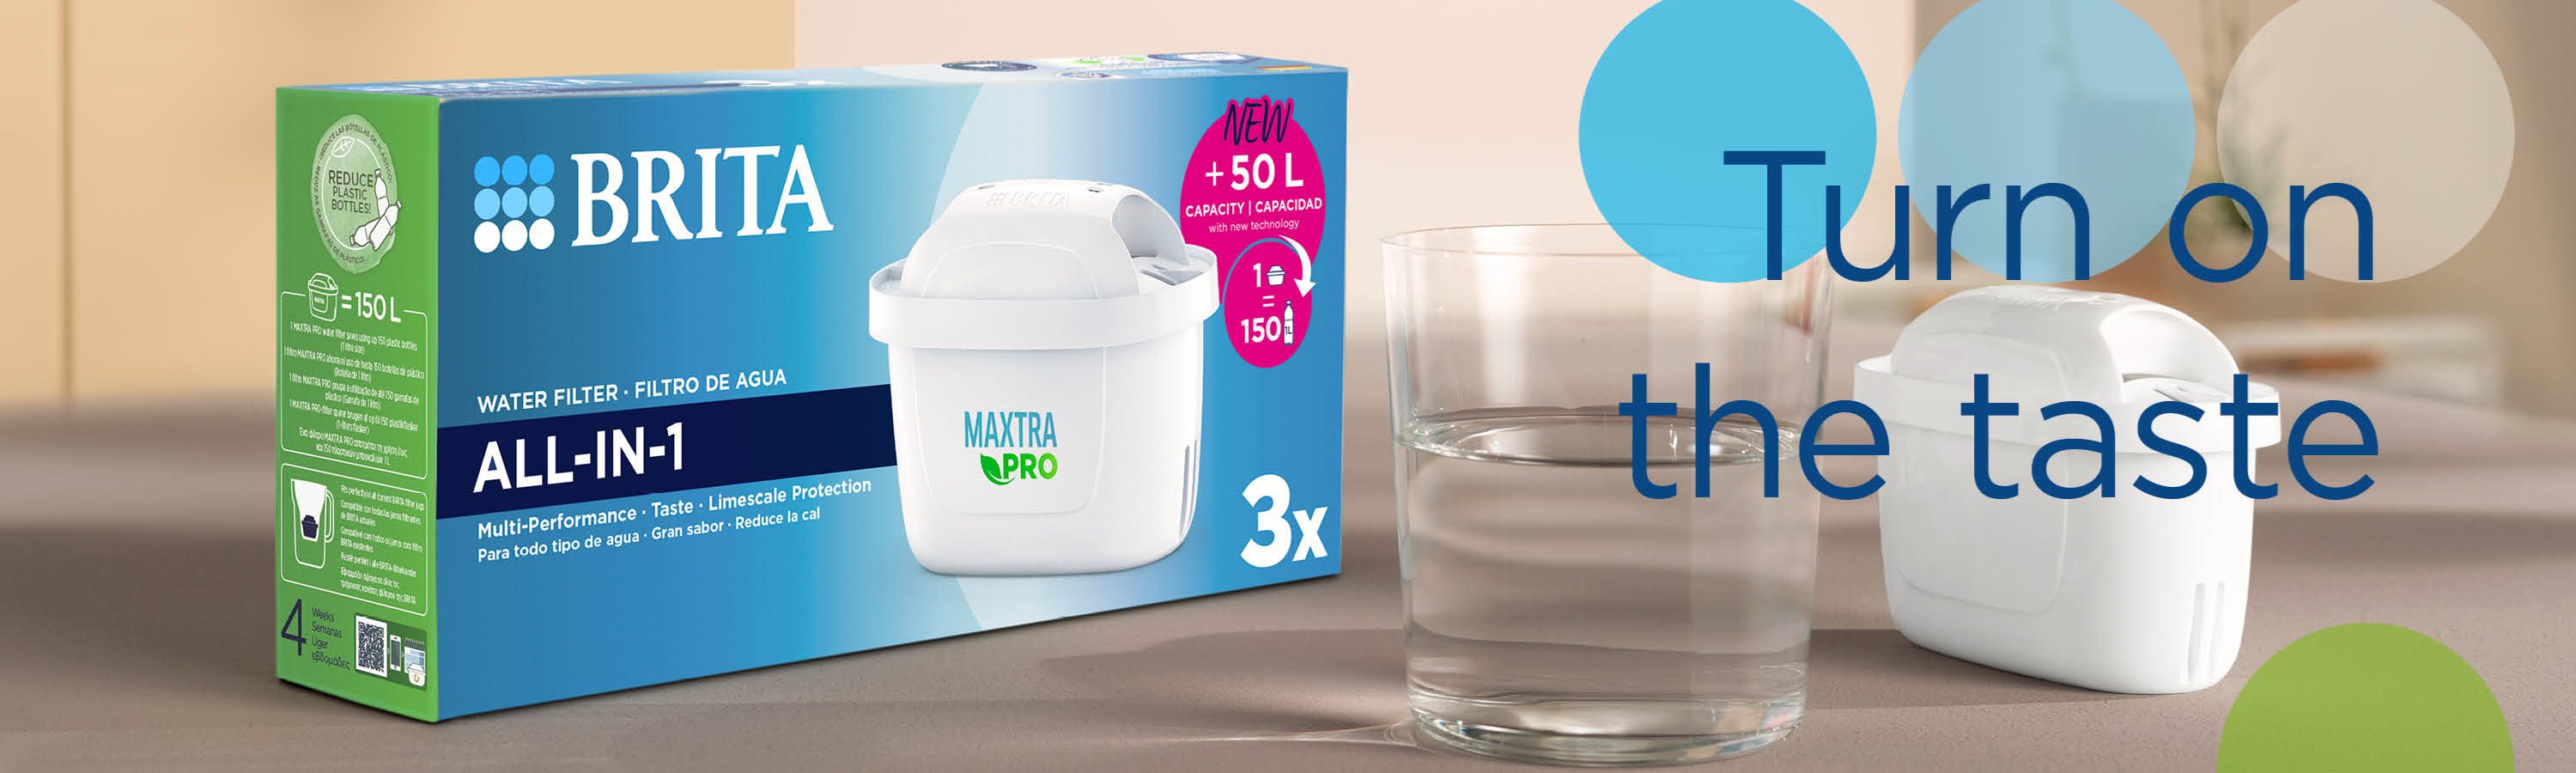 Buy BRITA MAXTRA PRO All-In-1 Water Filter Cartridge – 6 Pack, Water filter  jugs and cartridges